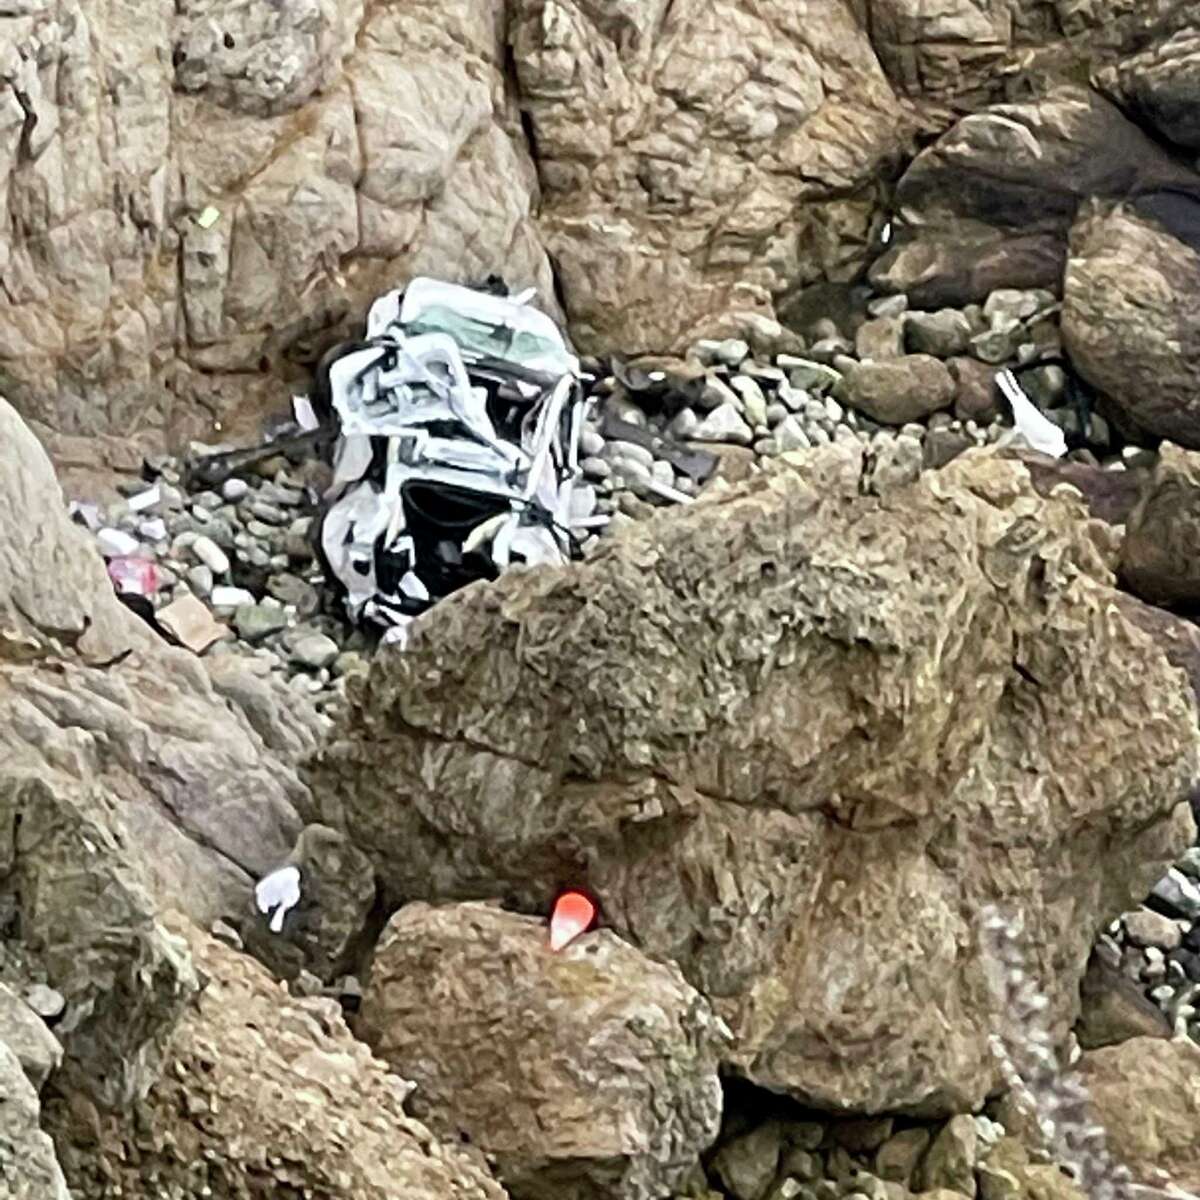 FILE - This image from video provided by San Mateo County Sheriff's Office shows a Tesla vehicle that plunged off the Pacific Coast Highway, Monday, Jan. 2, 2023, near Devil's Slide, leaving four people in critical condition, a fire official said. The driver of the Tesla that plunged off a cliff in Northern California, seriously wounding two children and his wife, has been charged with attempted murder. (San Mateo County Sheriff's Office via AP, File)